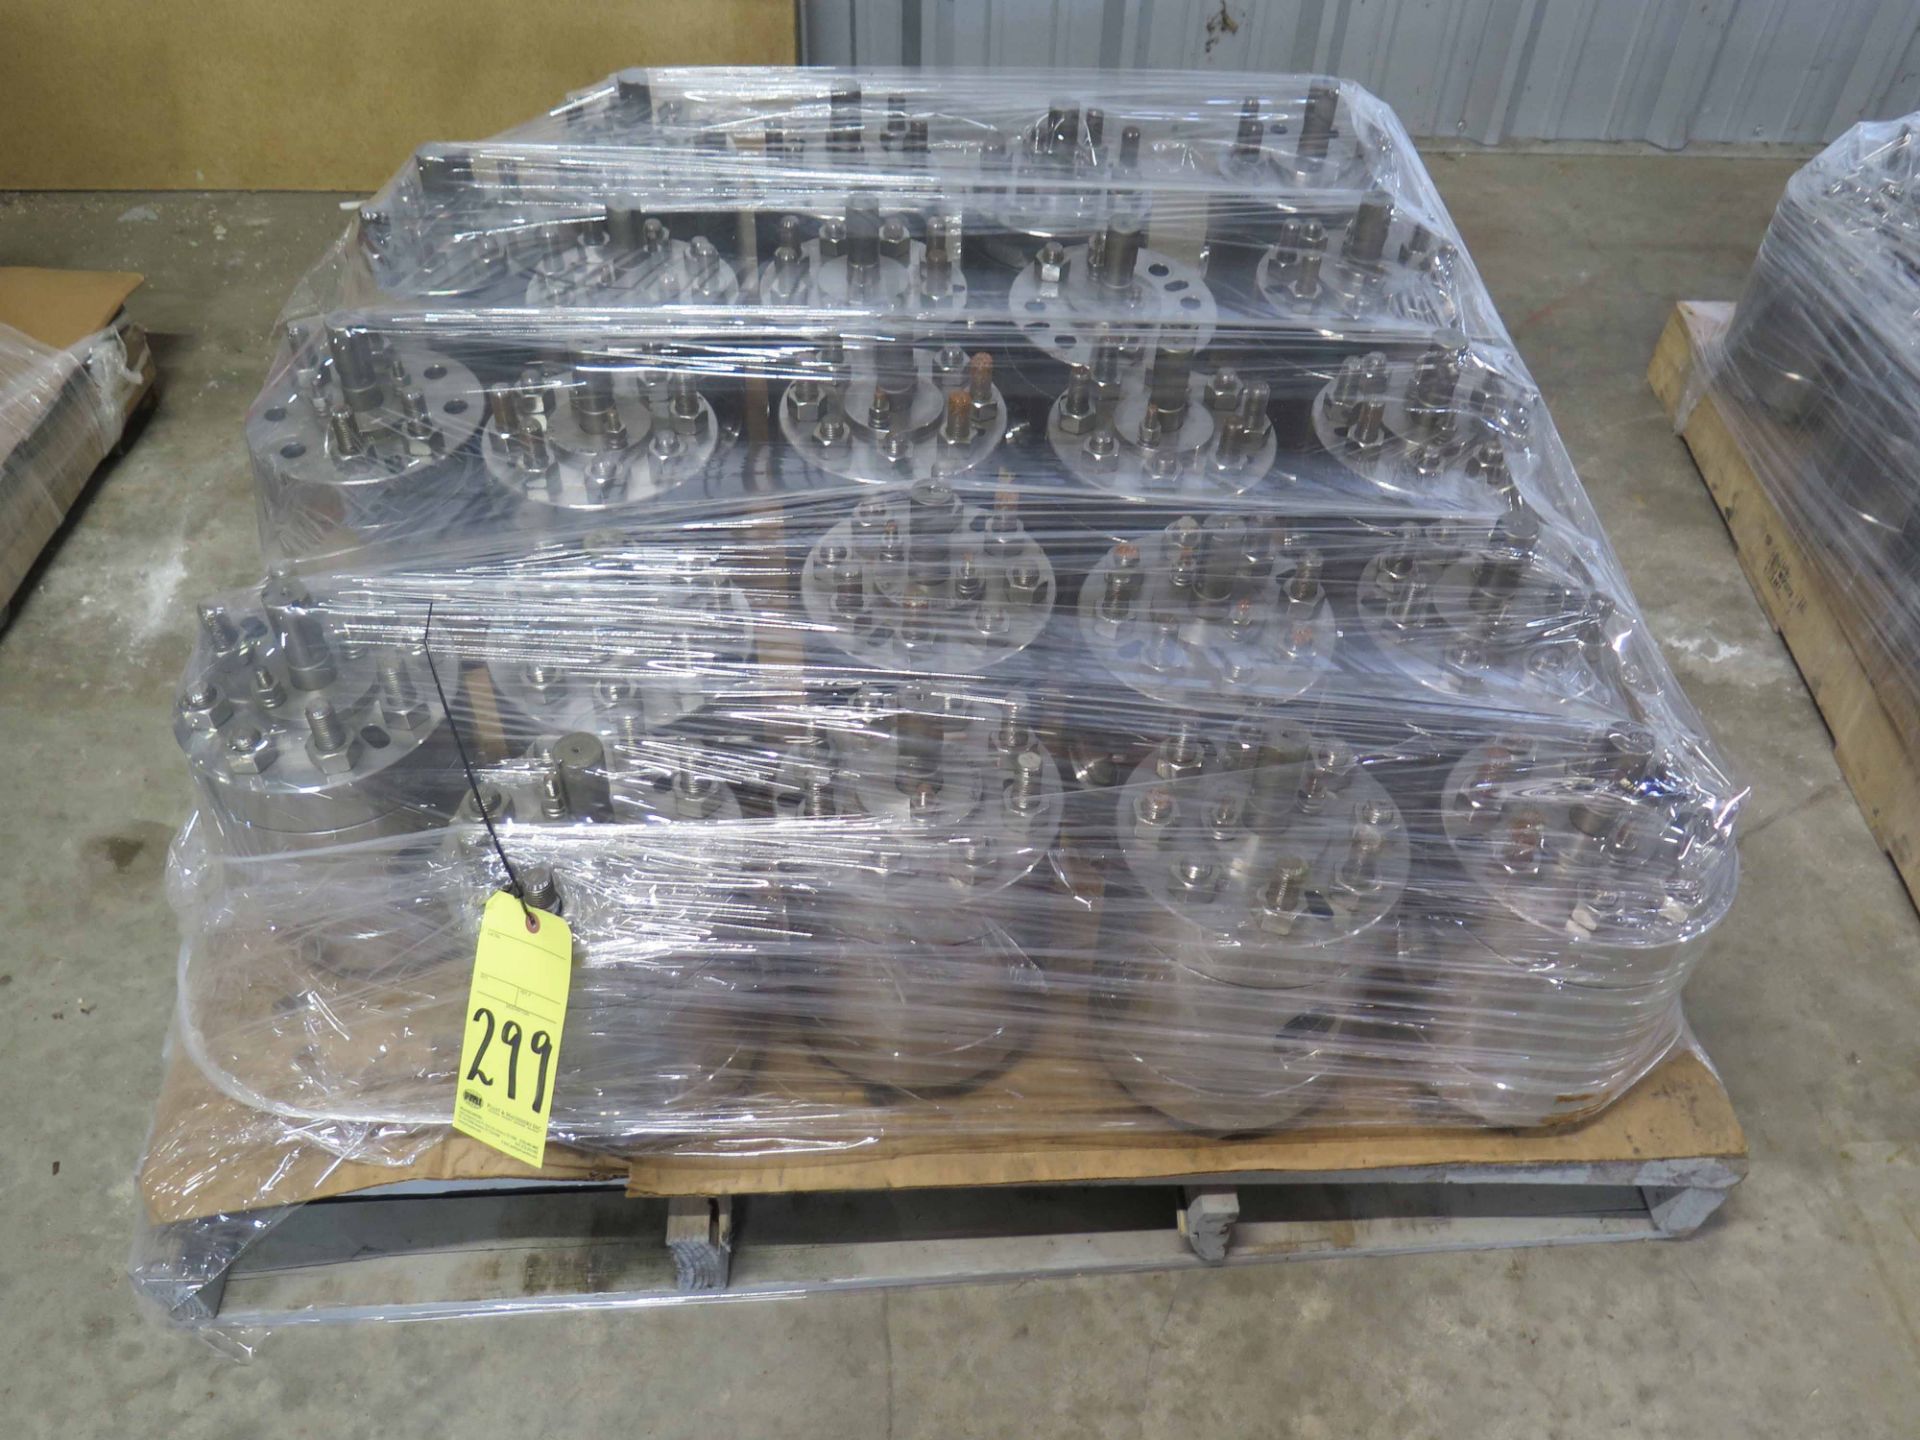 LOT OF ASSEMBLED BALL VALVES (23), 1-1/2" (on one pallet)